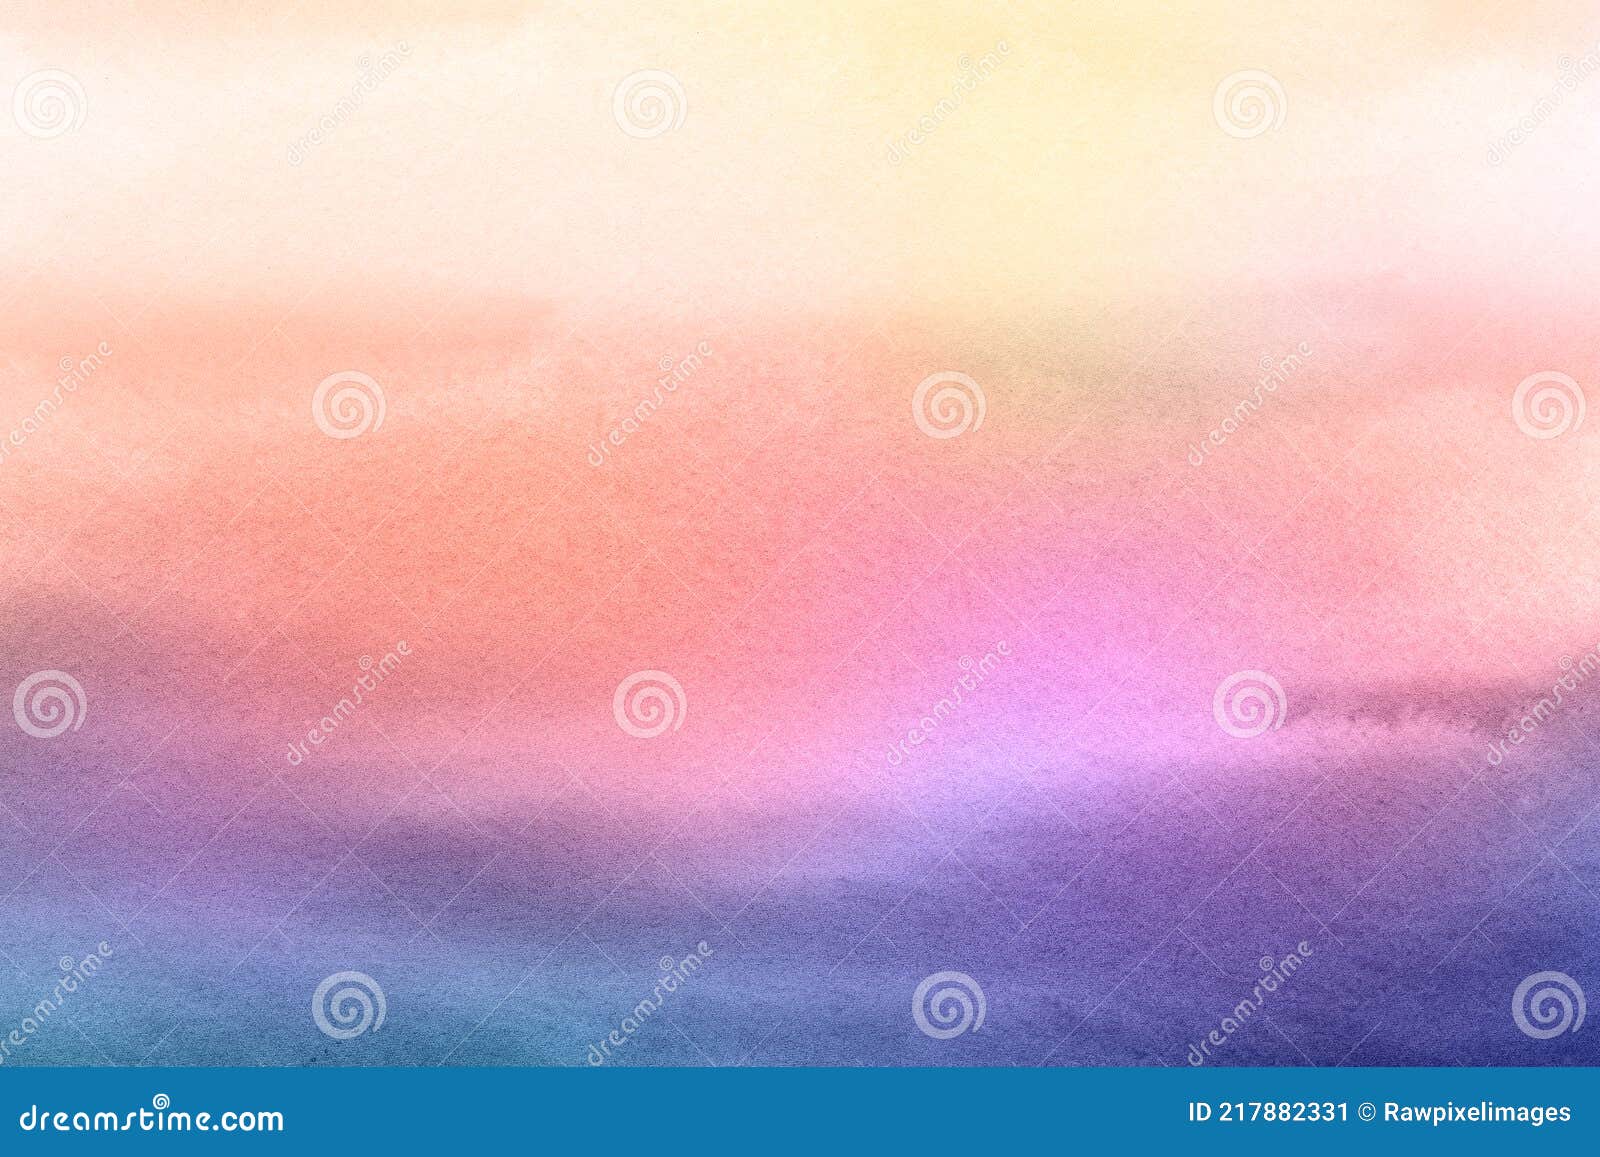 dark ombre rainbow watercolor style background 